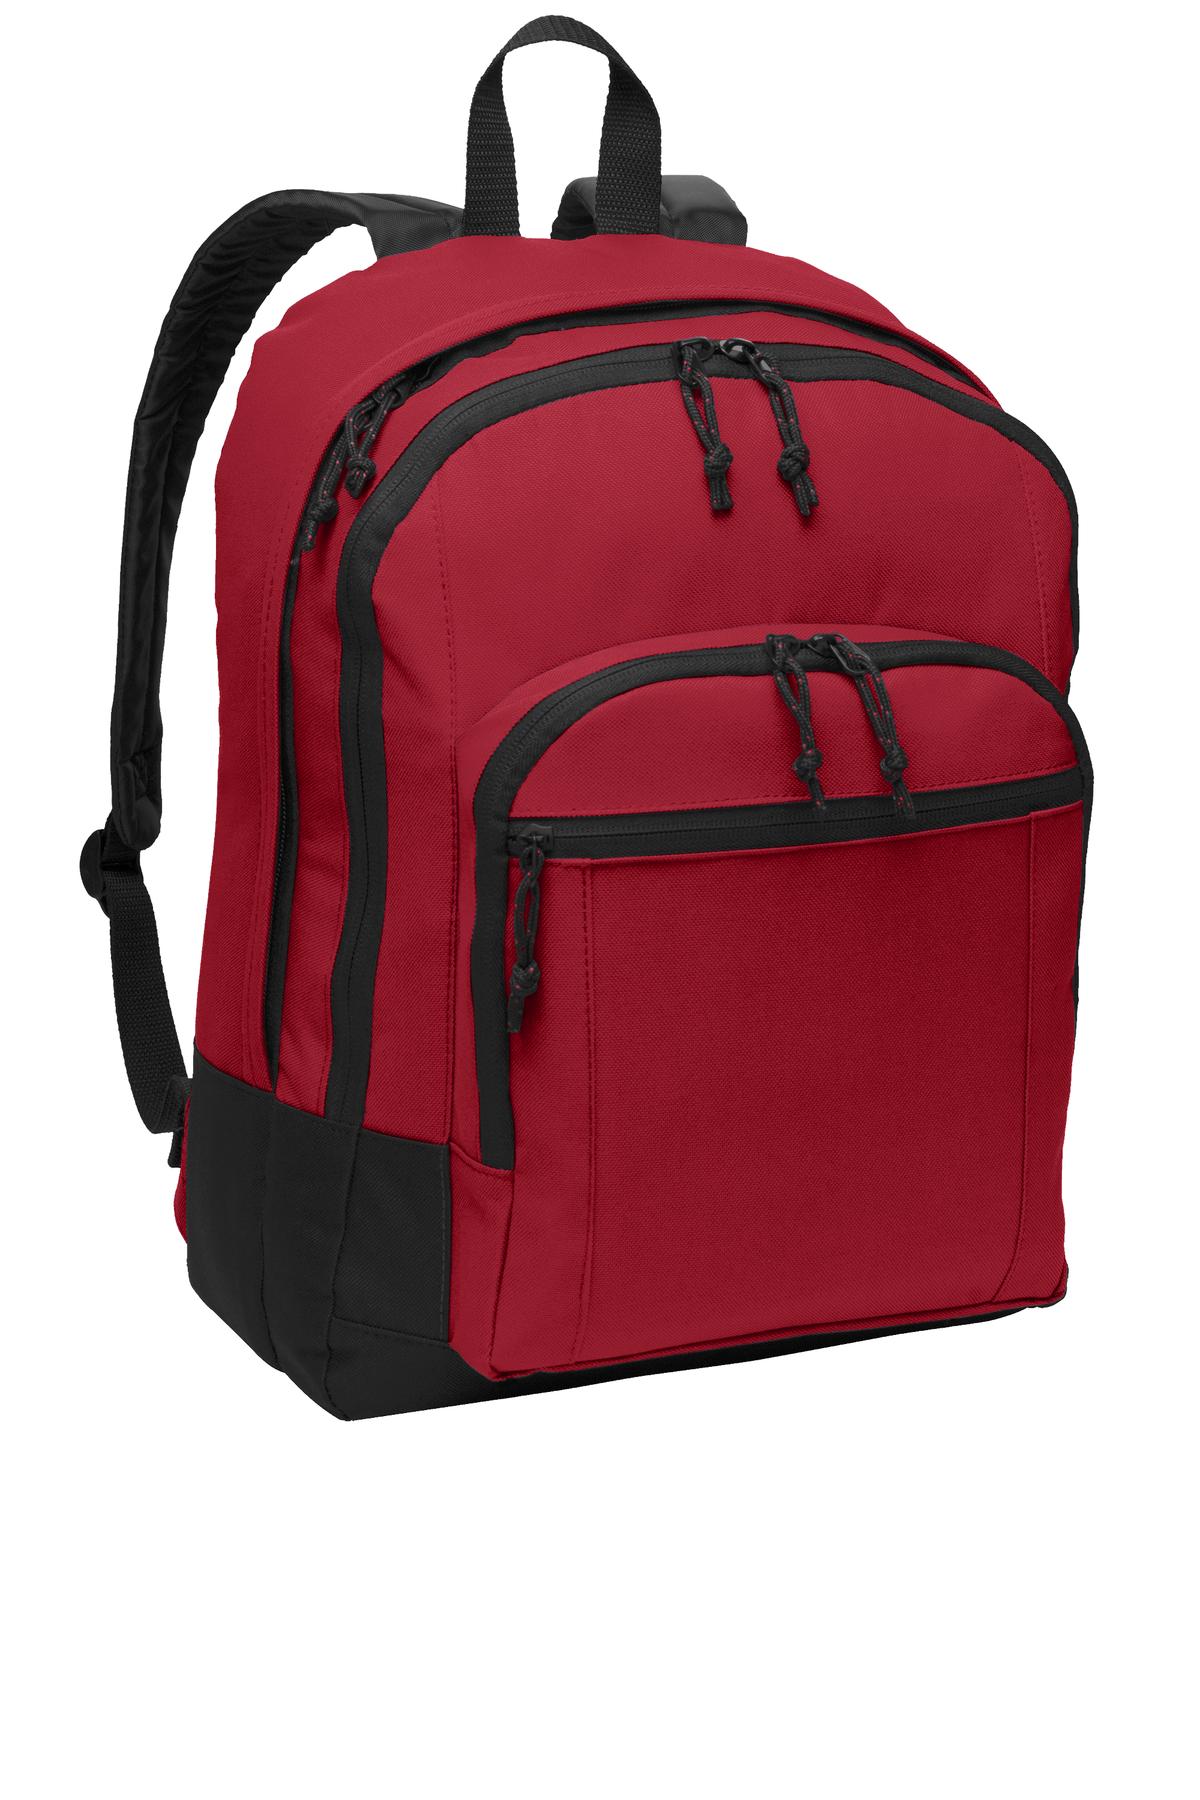 Photo of Port Authority Bags BG204  color  Red